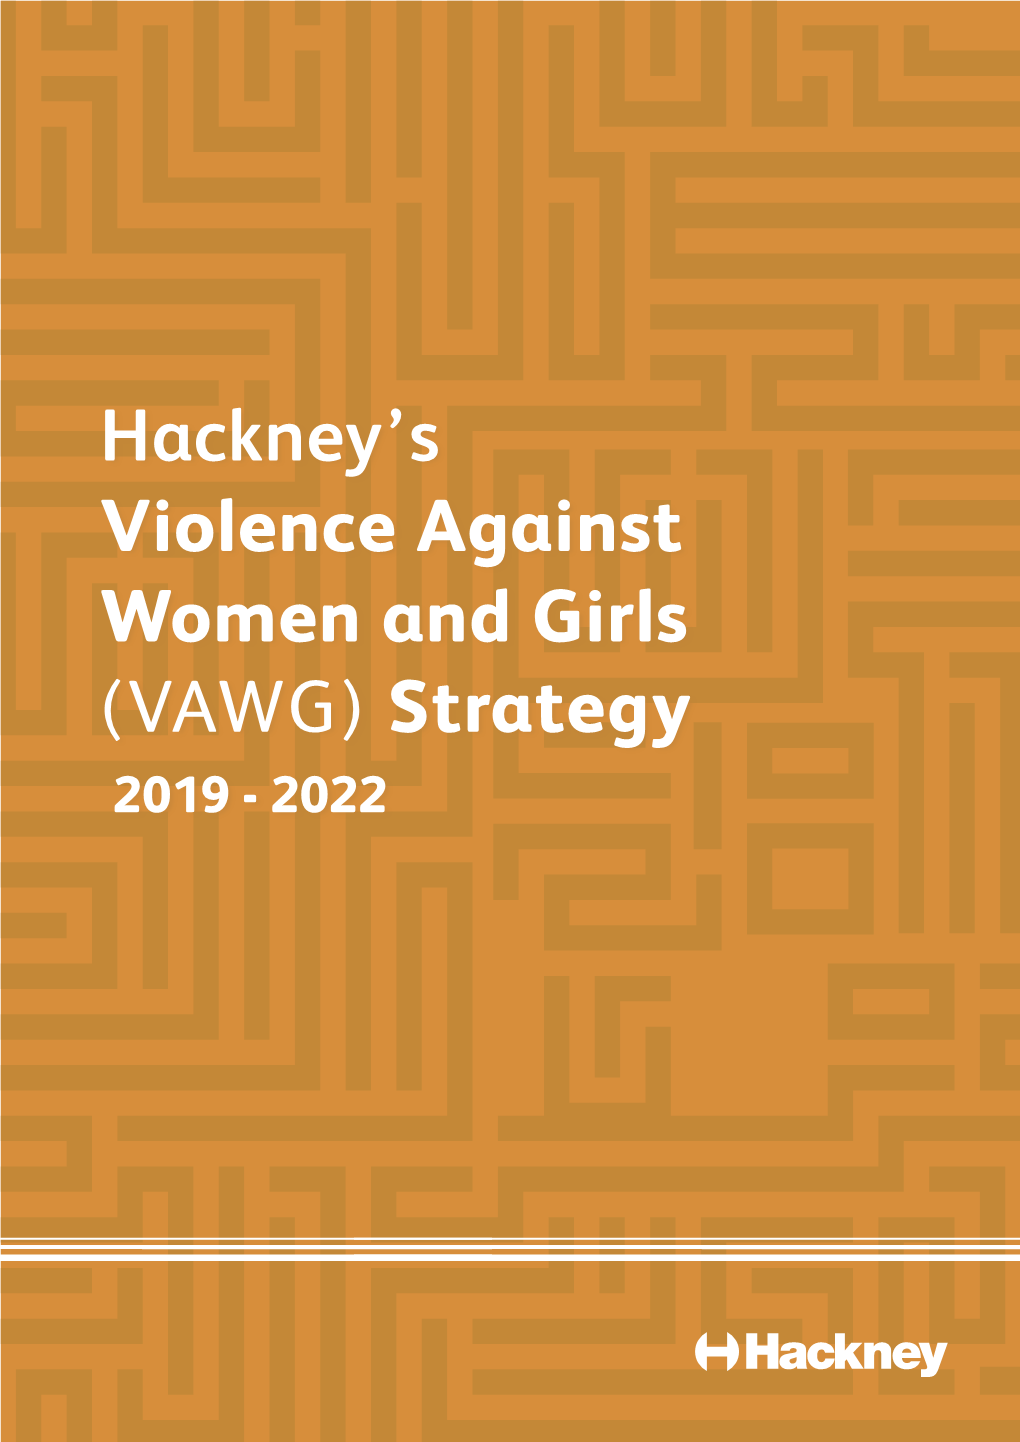 Hackney's Violence Against Women and Girls (VAWG) Strategy